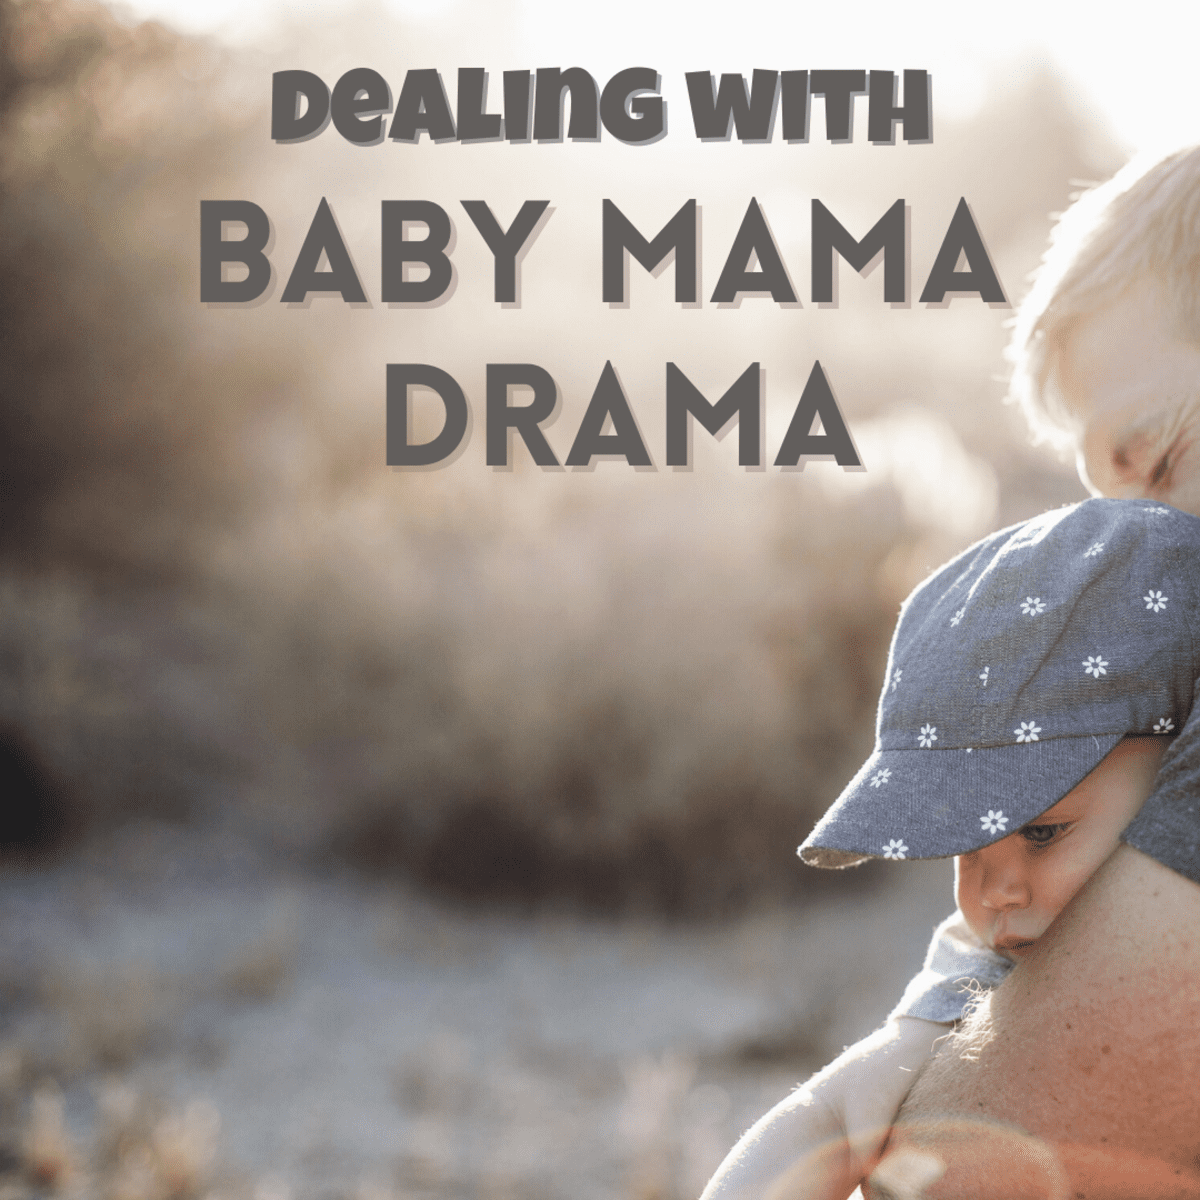 Setting appropriate boundaries with baby mama